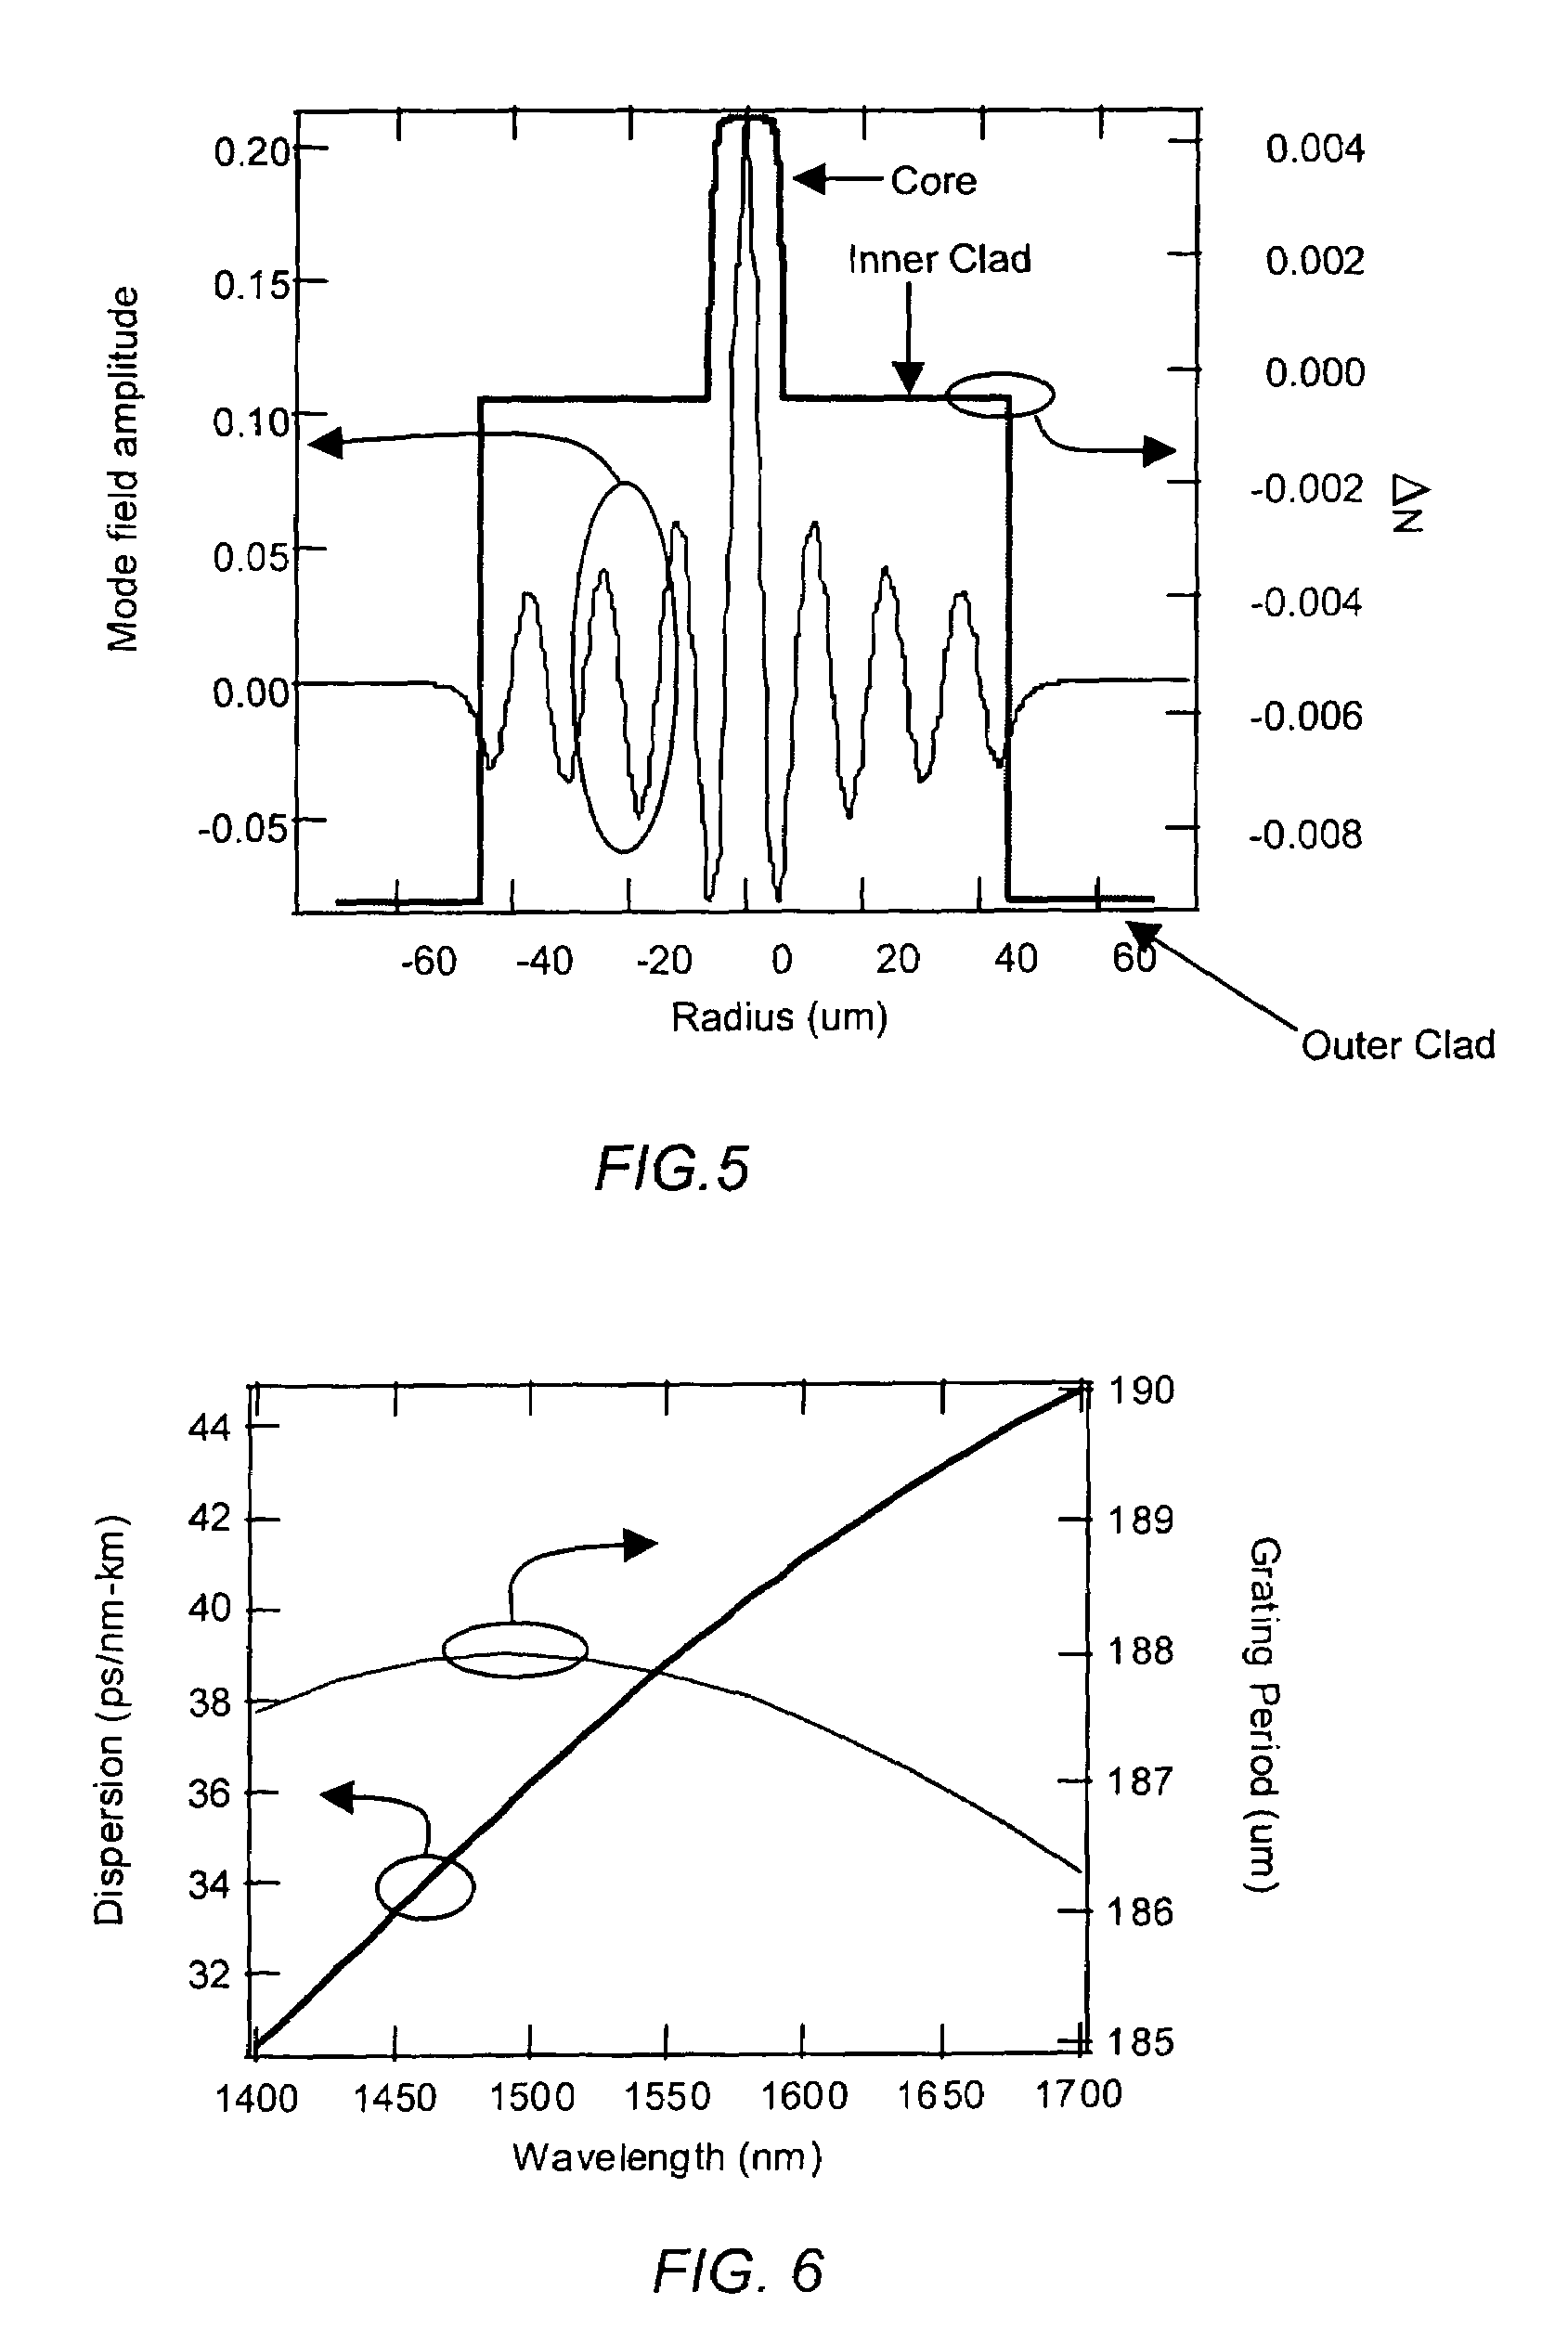 Short pulse lasers using large mode area fibers and higher order modes